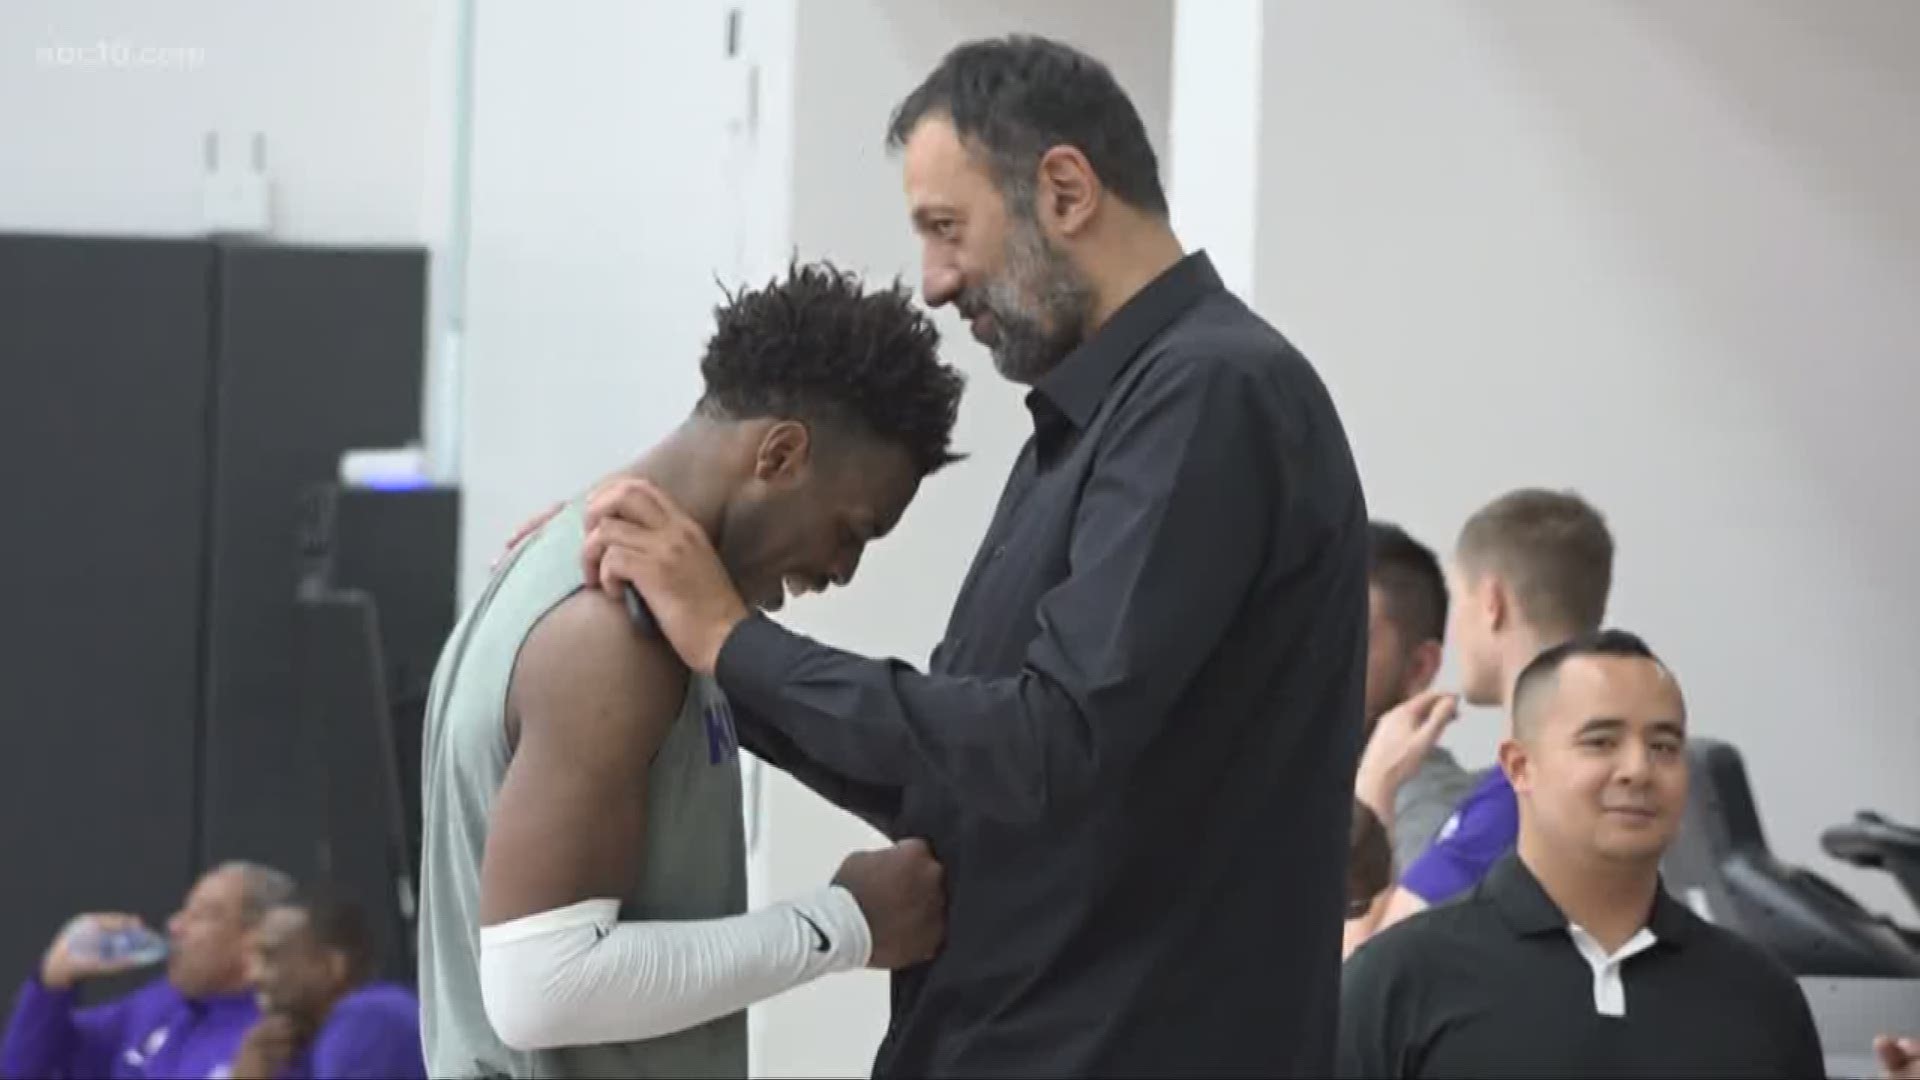 Buddy Hield has signed a contract extension with the Sacramento Kings. GM Vlade Divac talked about what Buddy brings to the team, while Buddy calls Sacramento home.